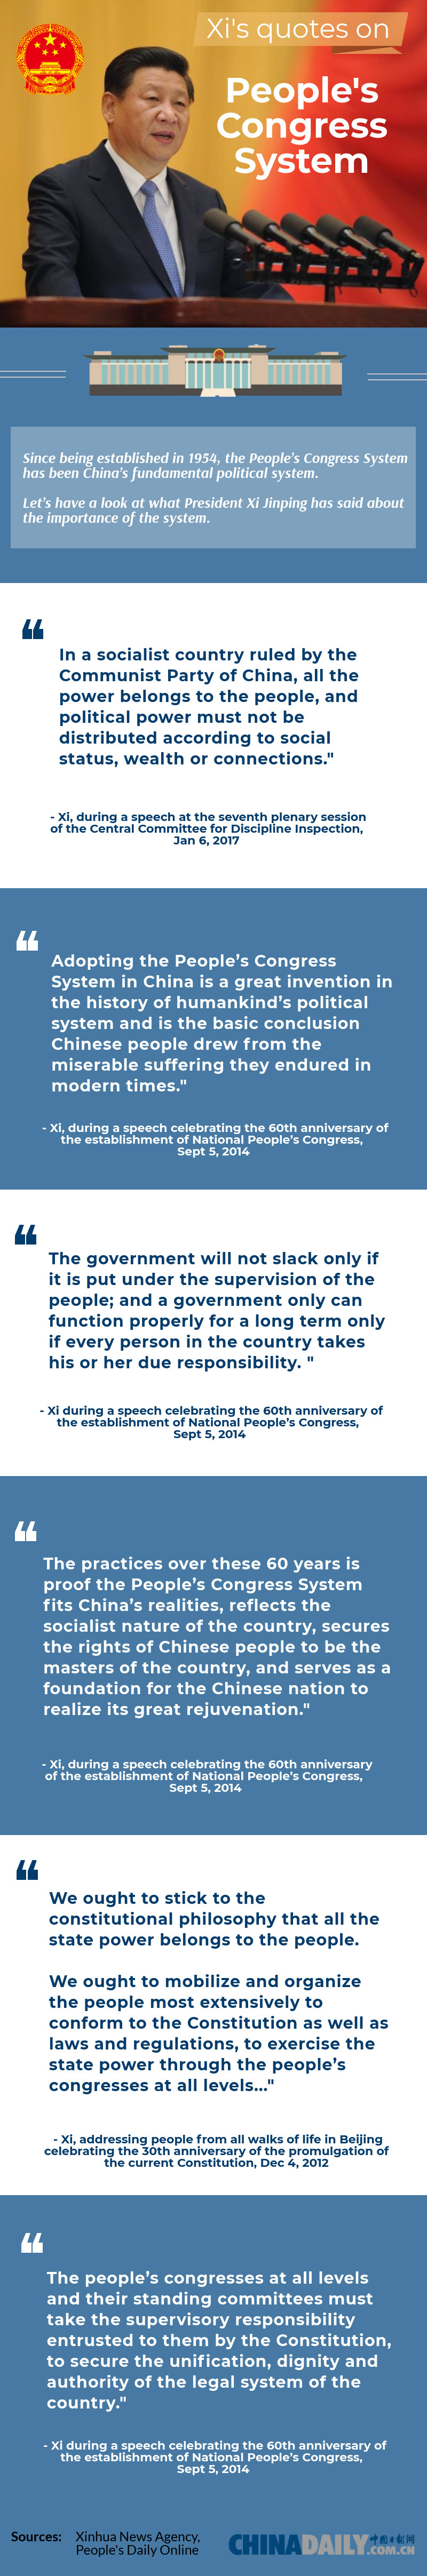 Xi's quotes on People's Congress System